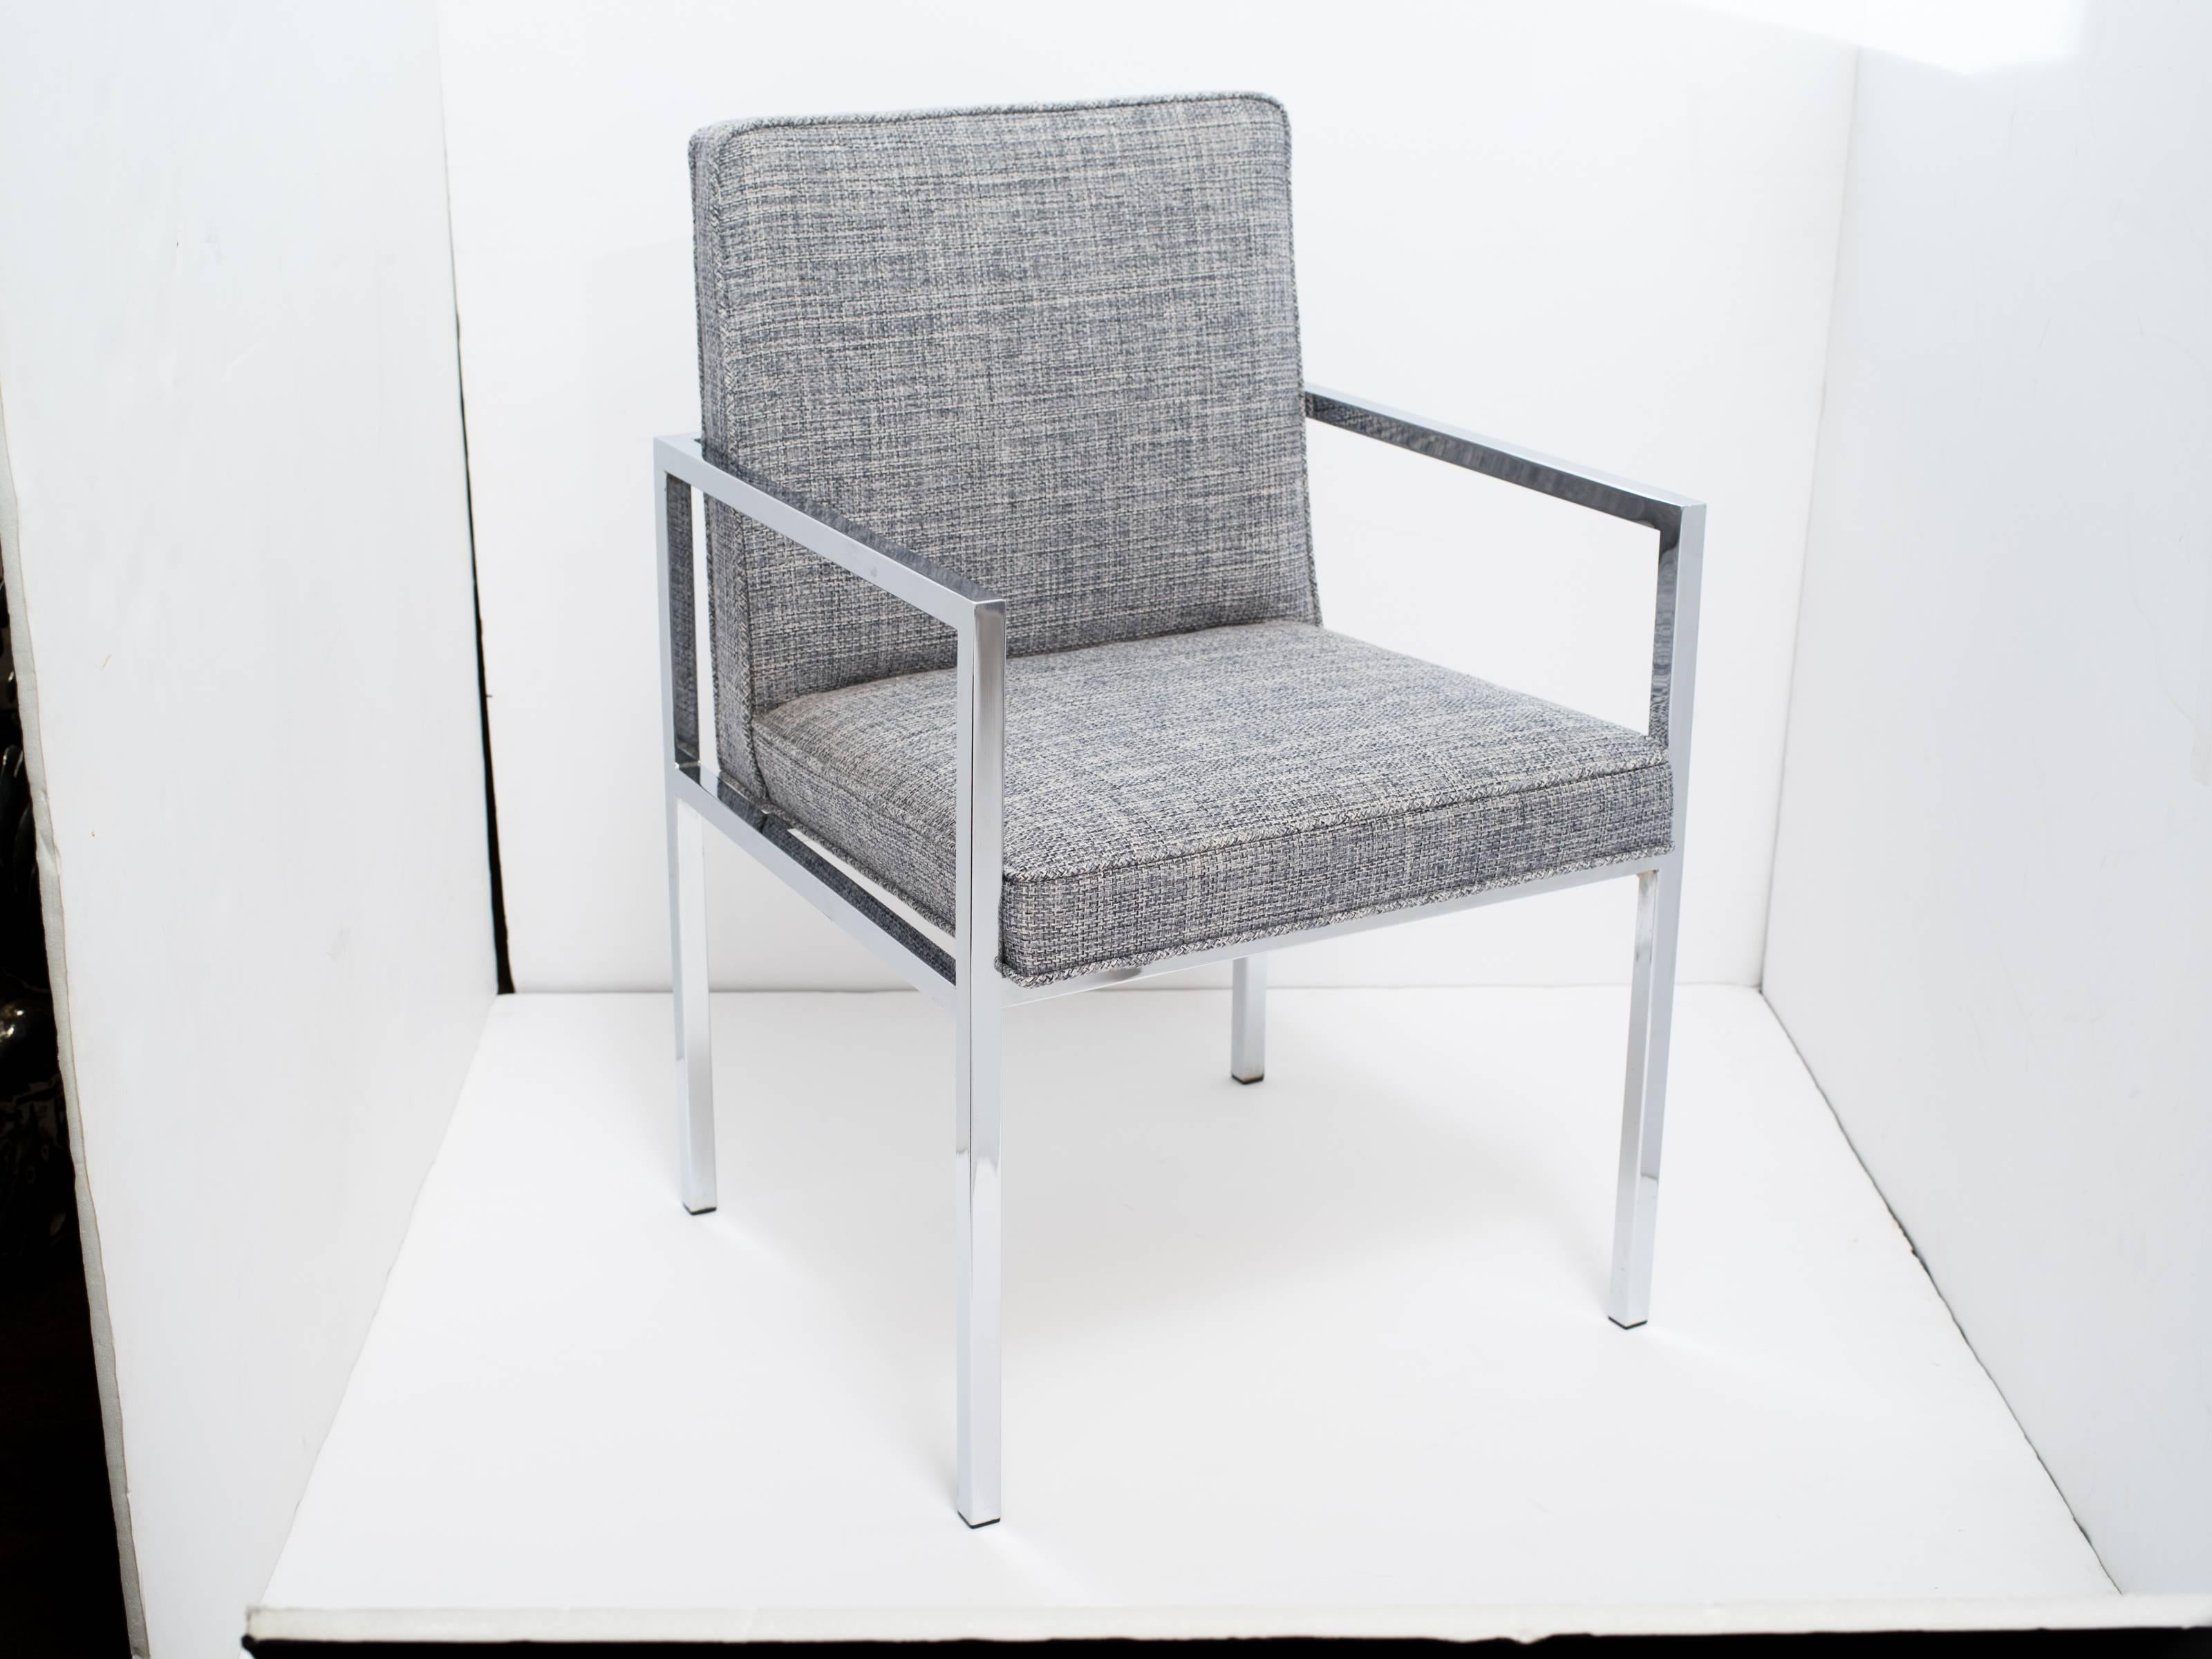 Handsome mid-century desk chair or side chair with sleek cantilevered chromed frame.  Newly upholstered in woven Rogers & Goffigon fabric in hues of steel blue and grey heather (cotton/linen).  There are two chairs available and sold separately.  